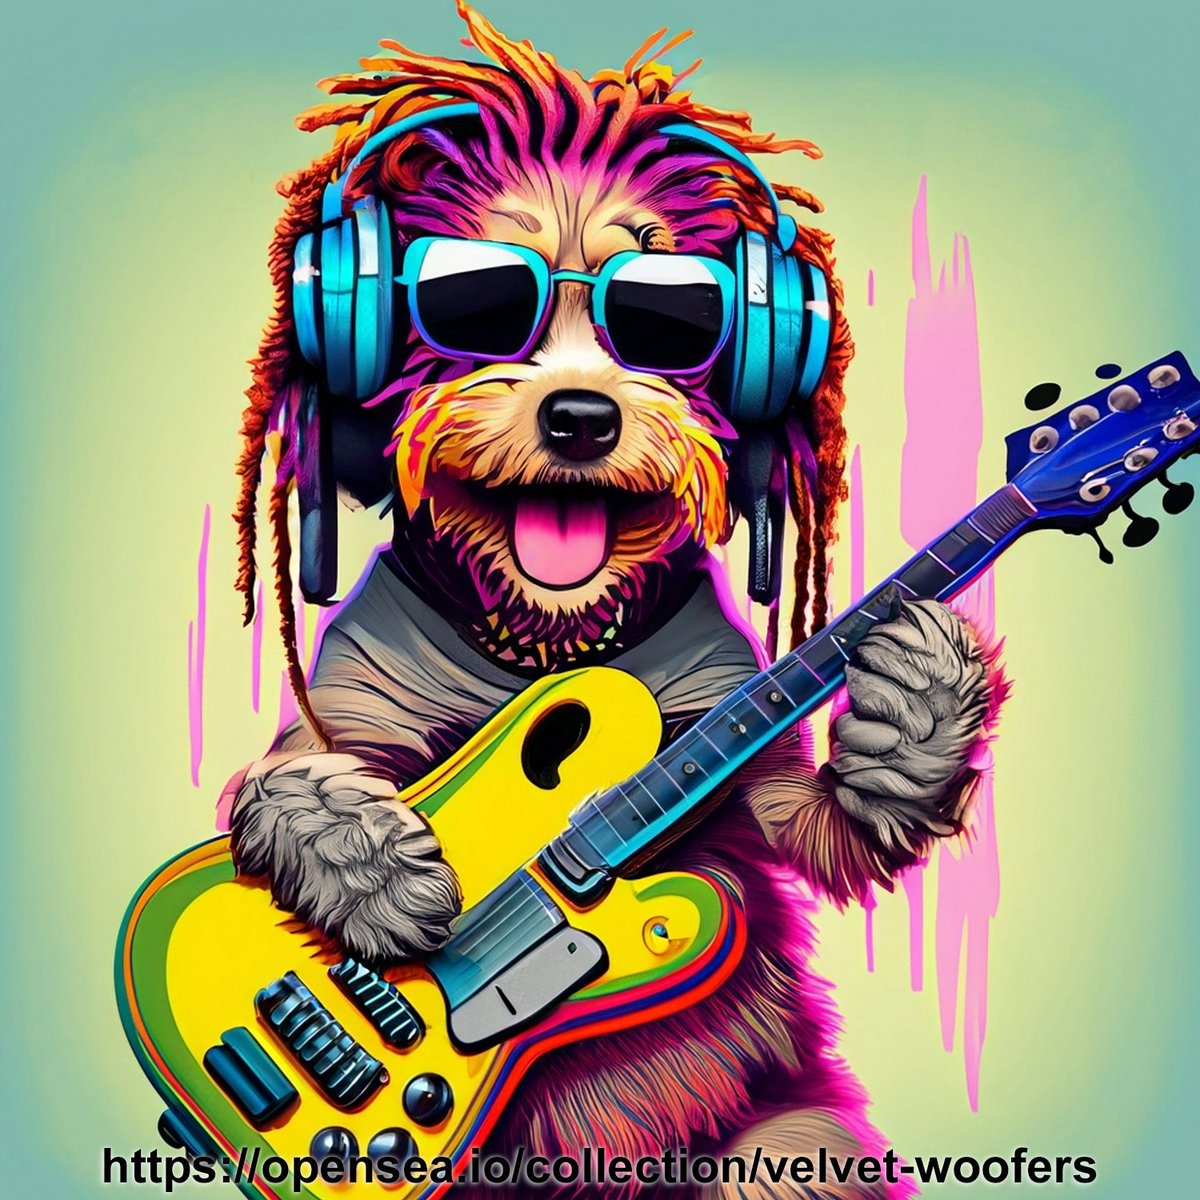 Lead Guitarist of the Velvet Woofers🐶

Electrifying NFT collectibles

opensea.io/collection/vel…

#VelvetWoofers #NFTArt #rockband #rockandroll #guitar #leadguitar #Leadguitarist #electricguitar #CollectibleNFTs #NFTCollection #NFTCommunity #NFT #NFTs